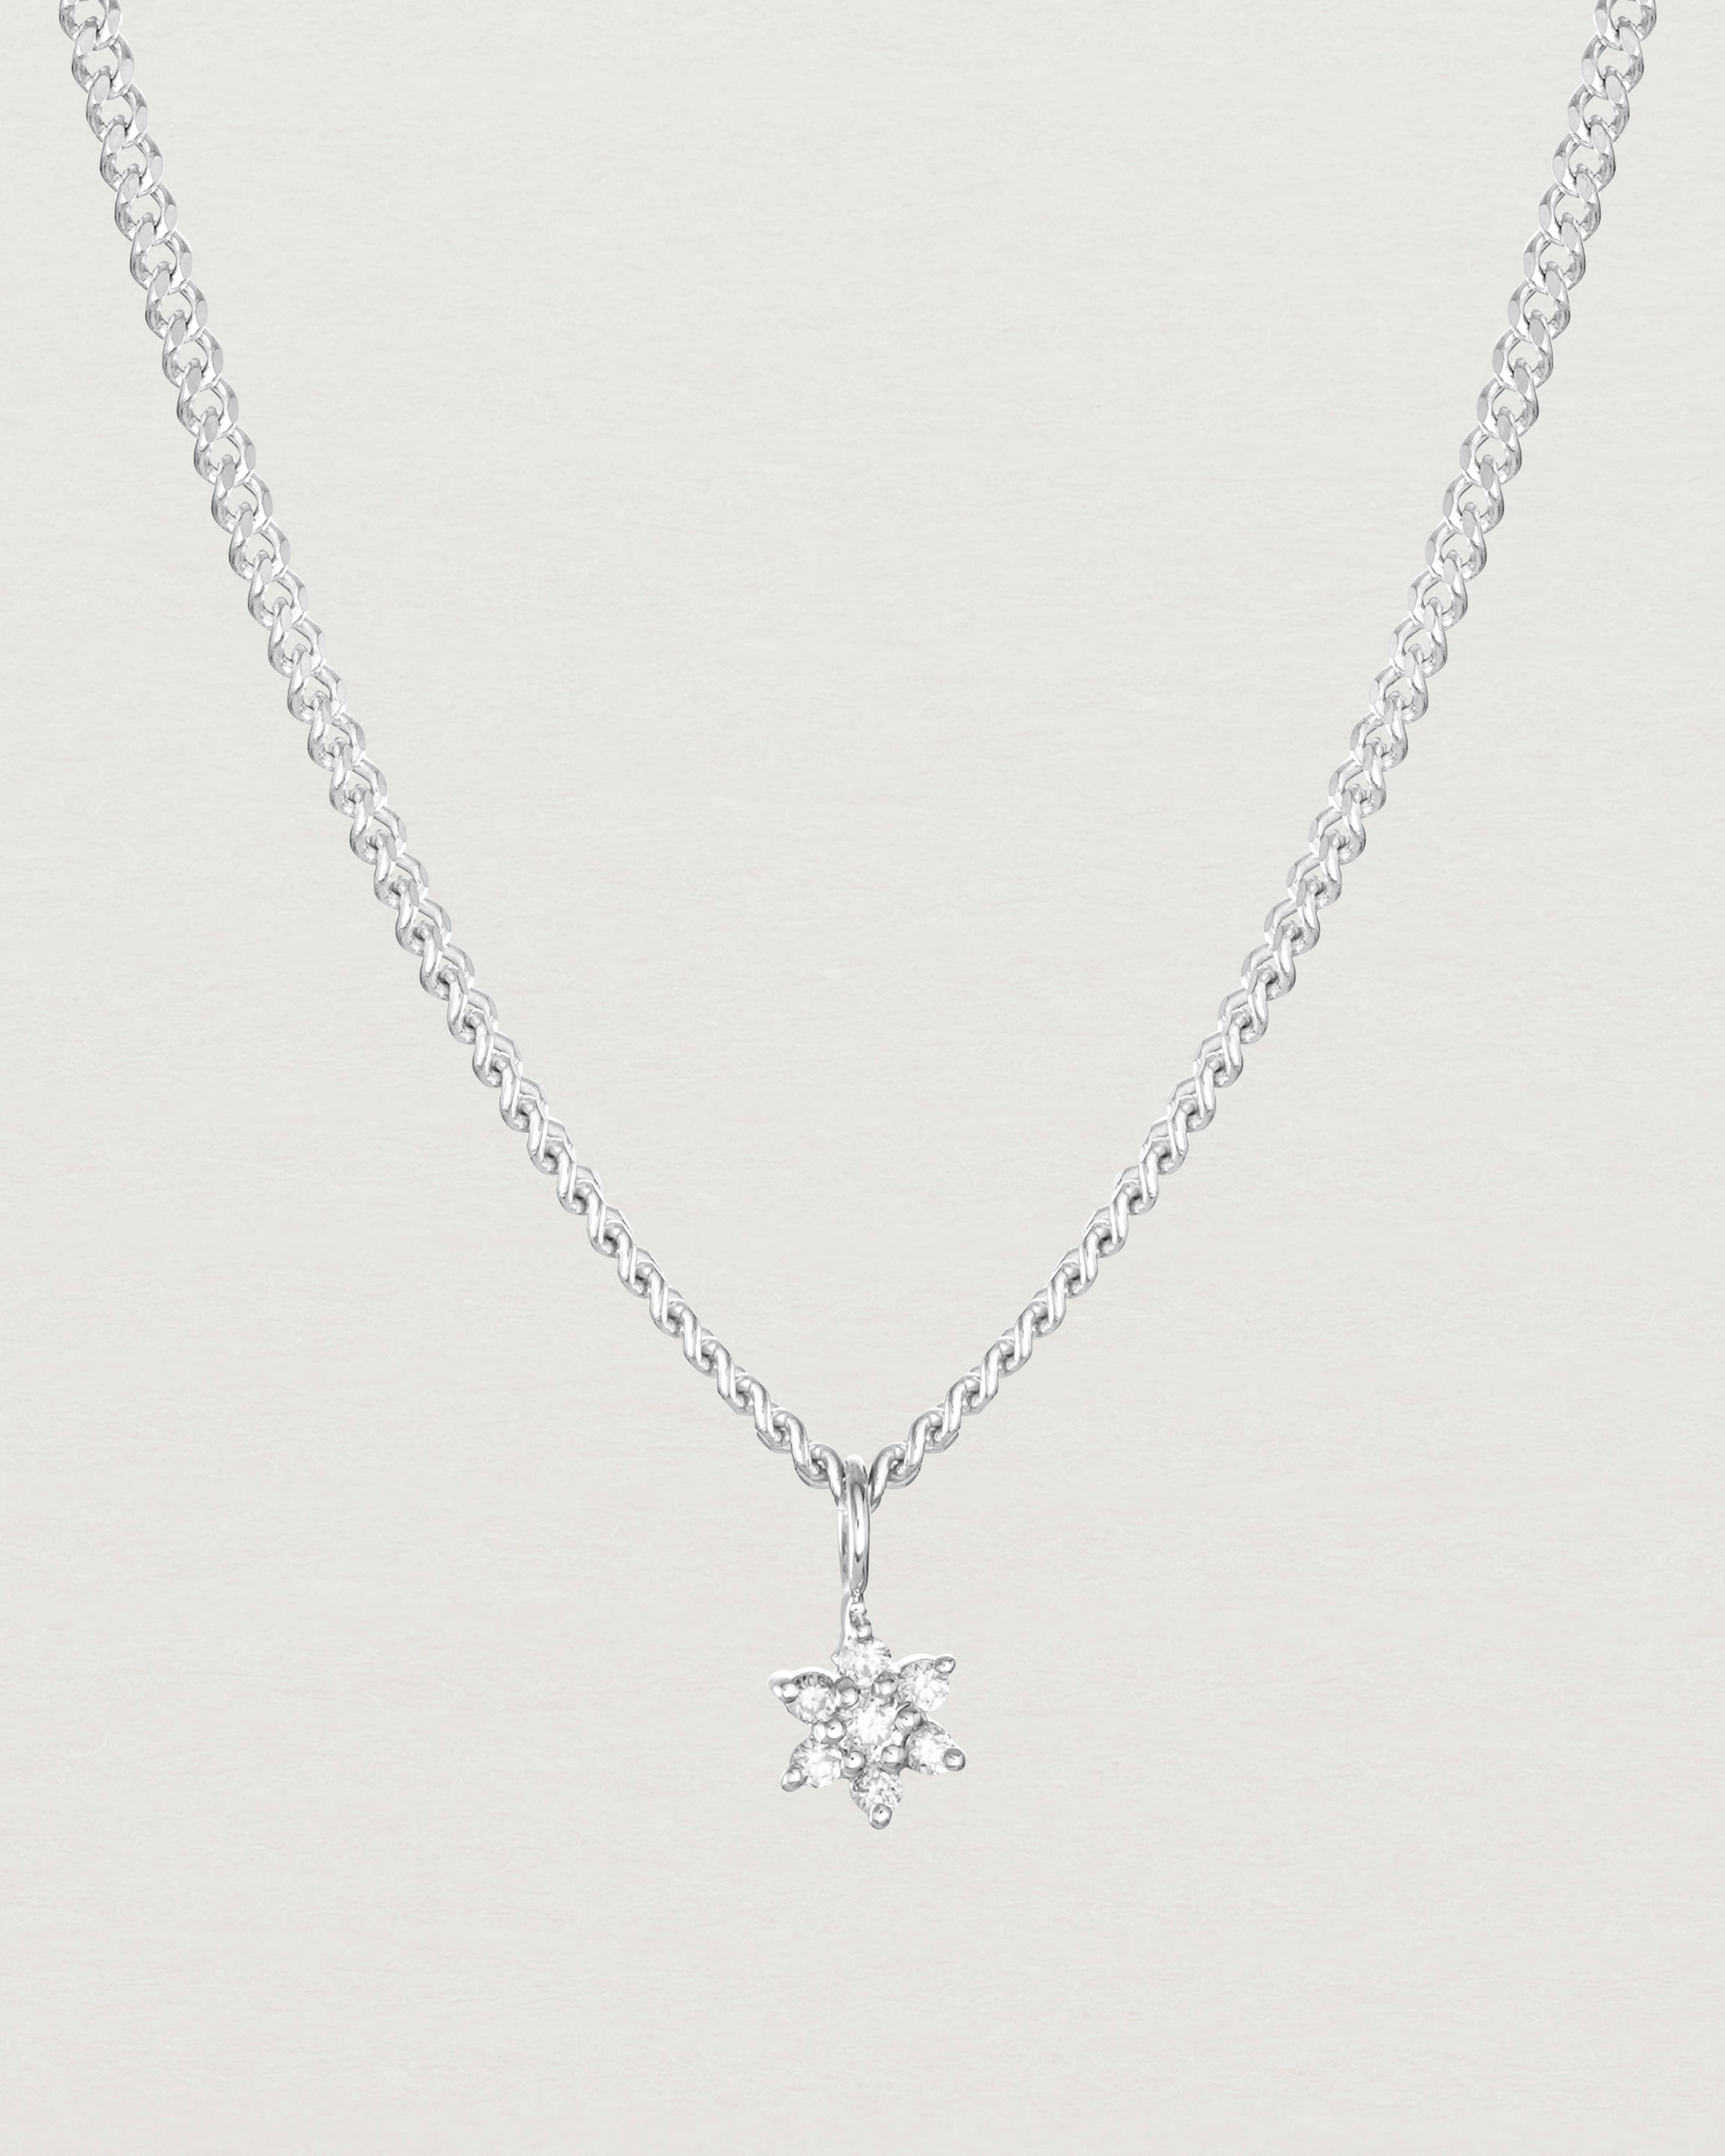 Close up image of the Petit Starburst Necklace in White Gold